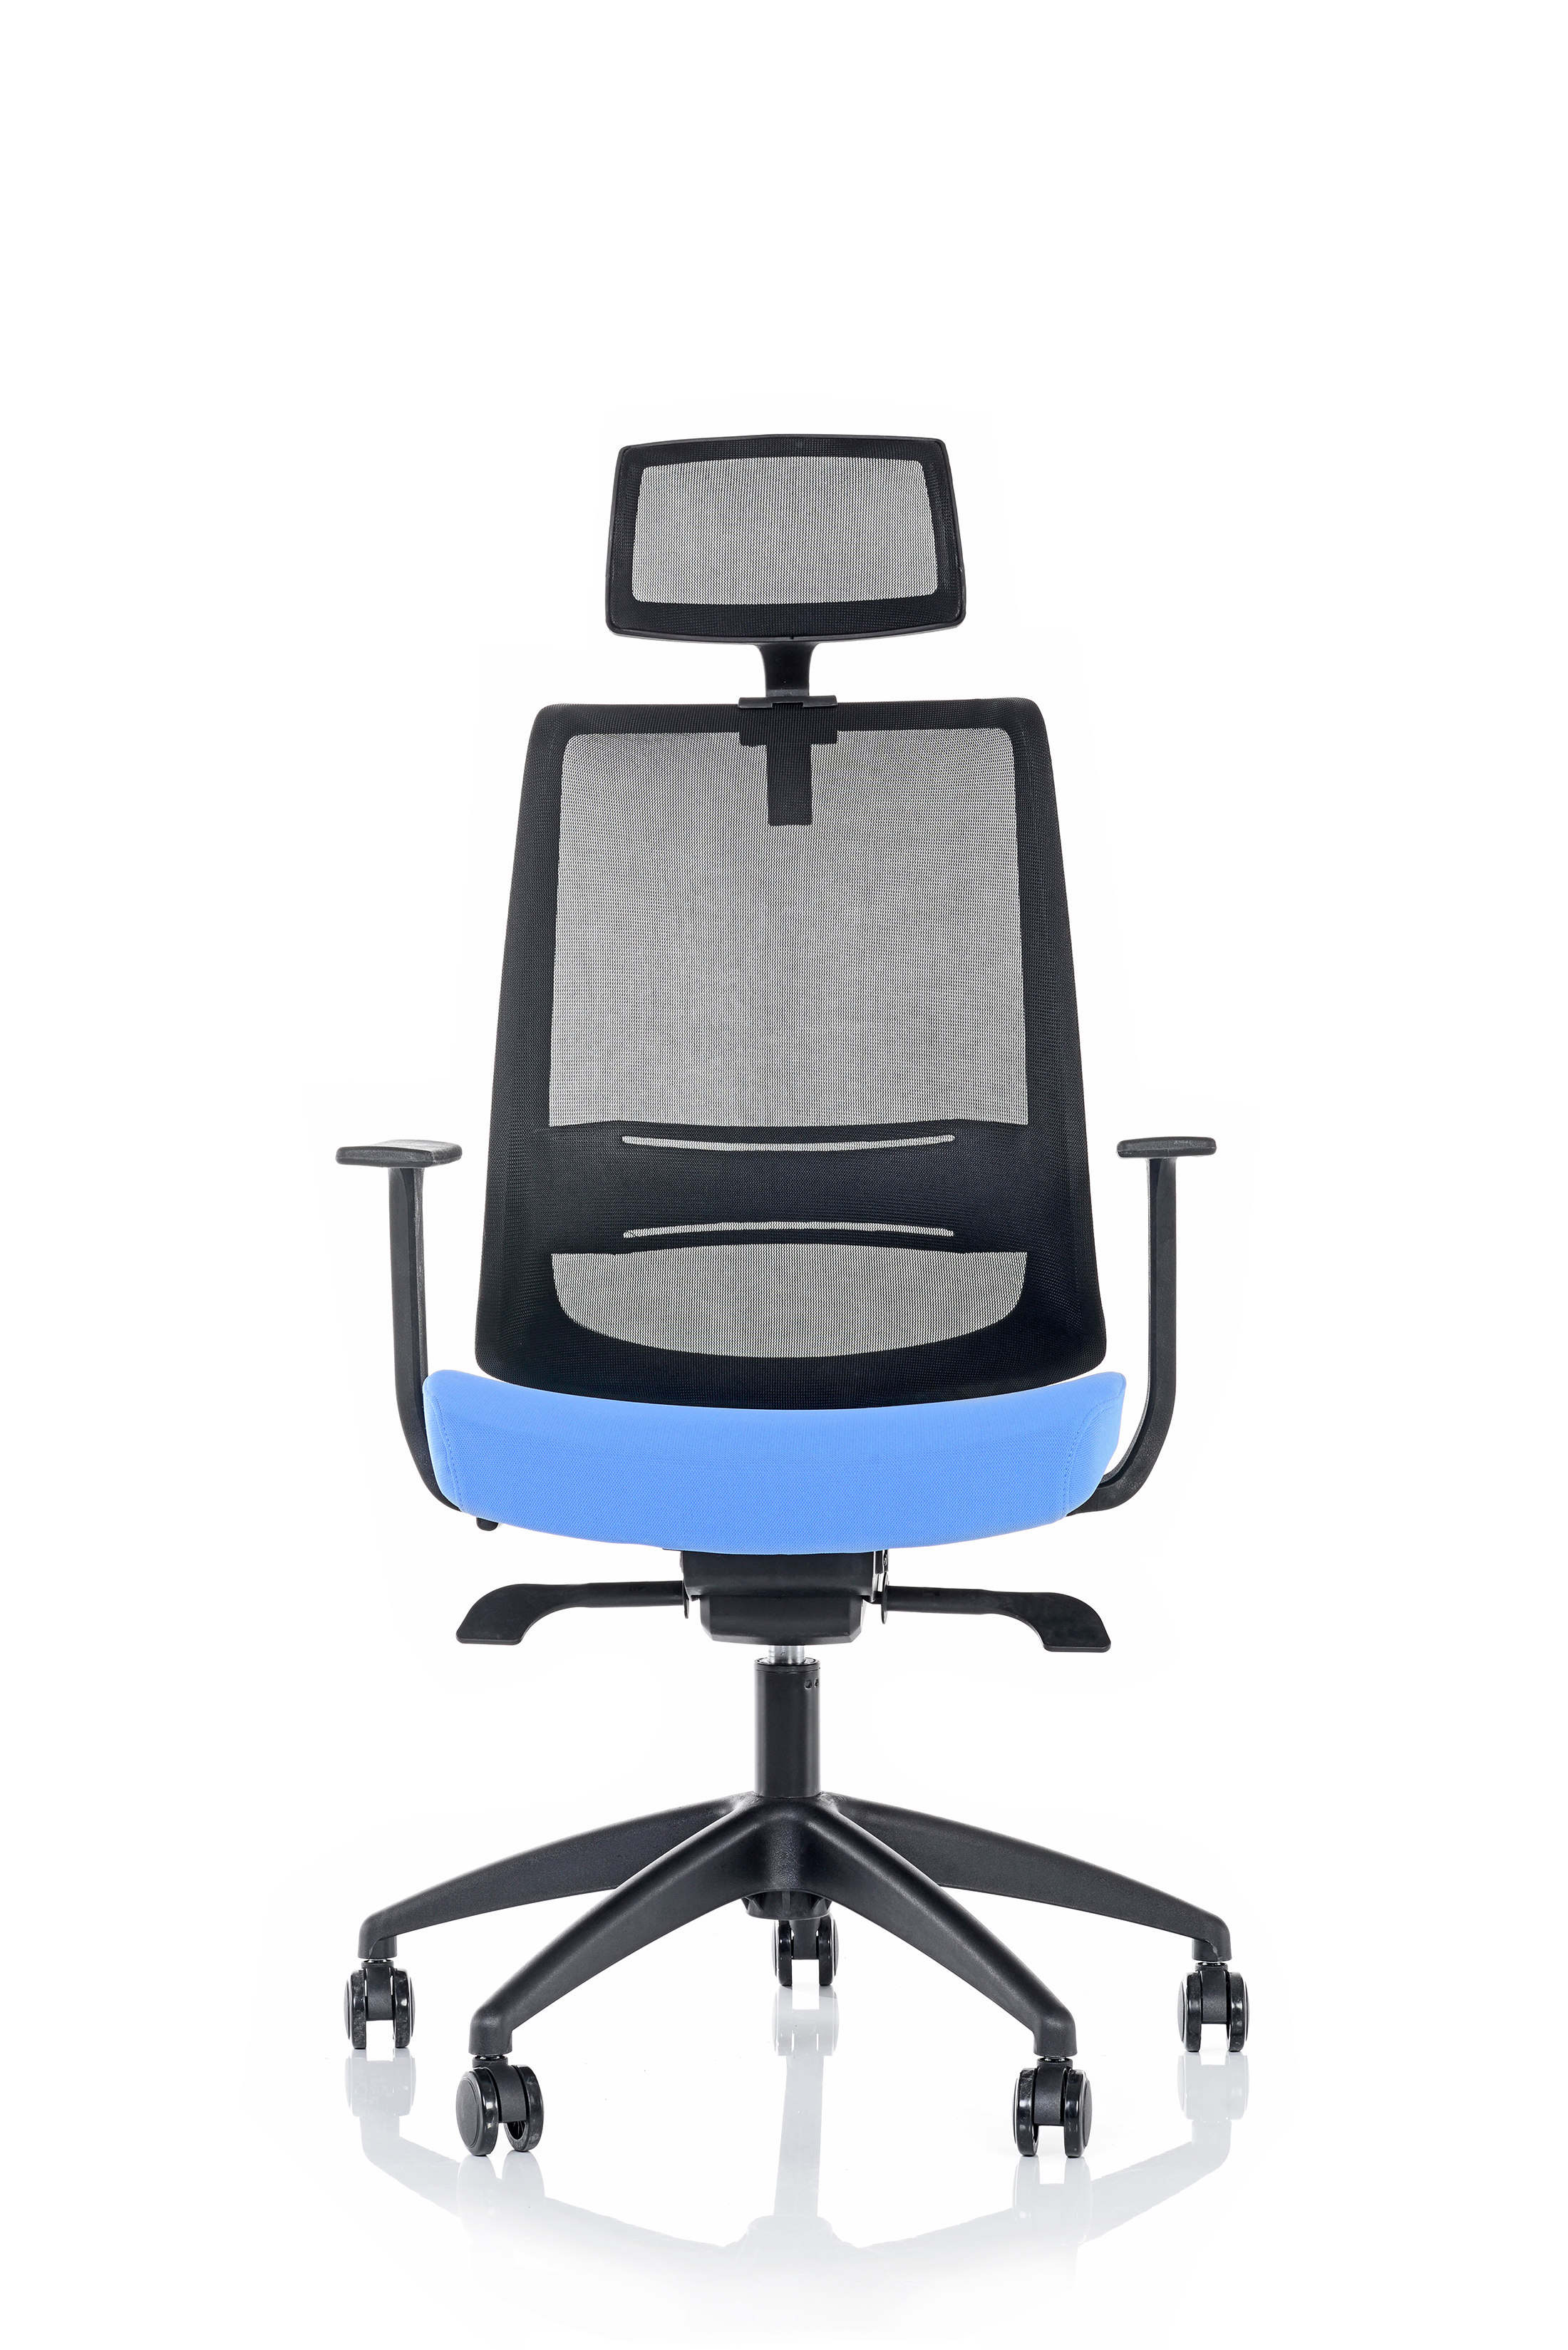 MERCUR 000T MANAGER CHAIR